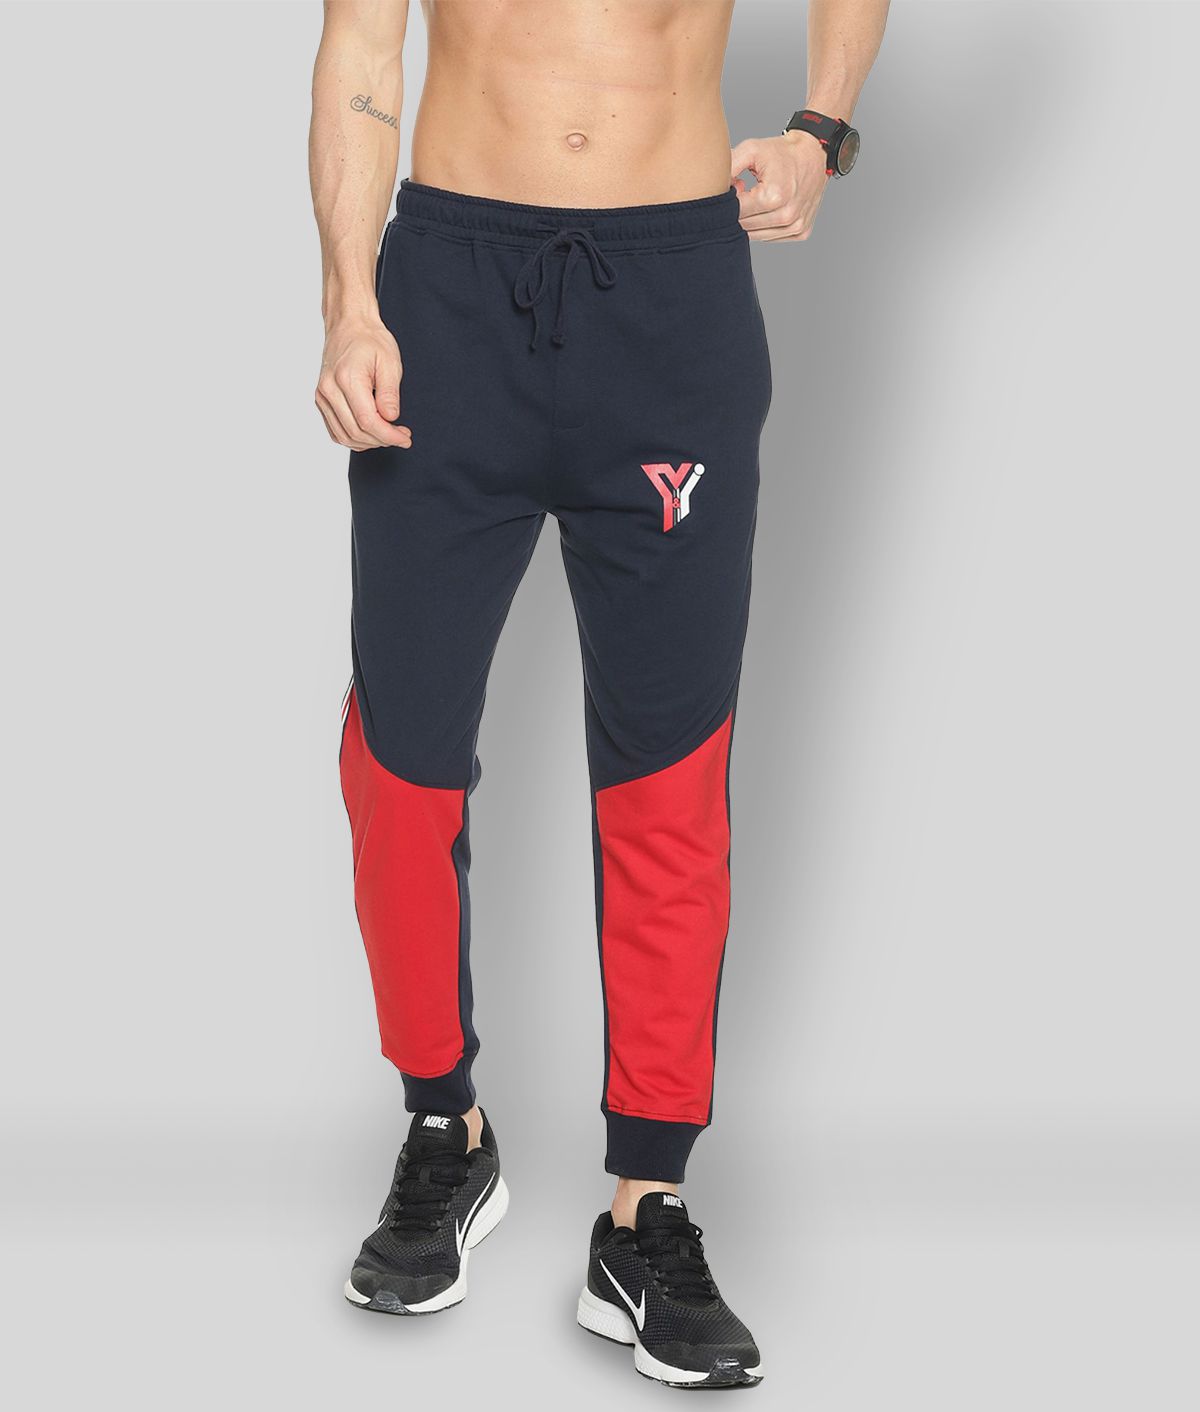     			Y & I - Navy Cotton Blend Men's Joggers ( Pack of 1 )